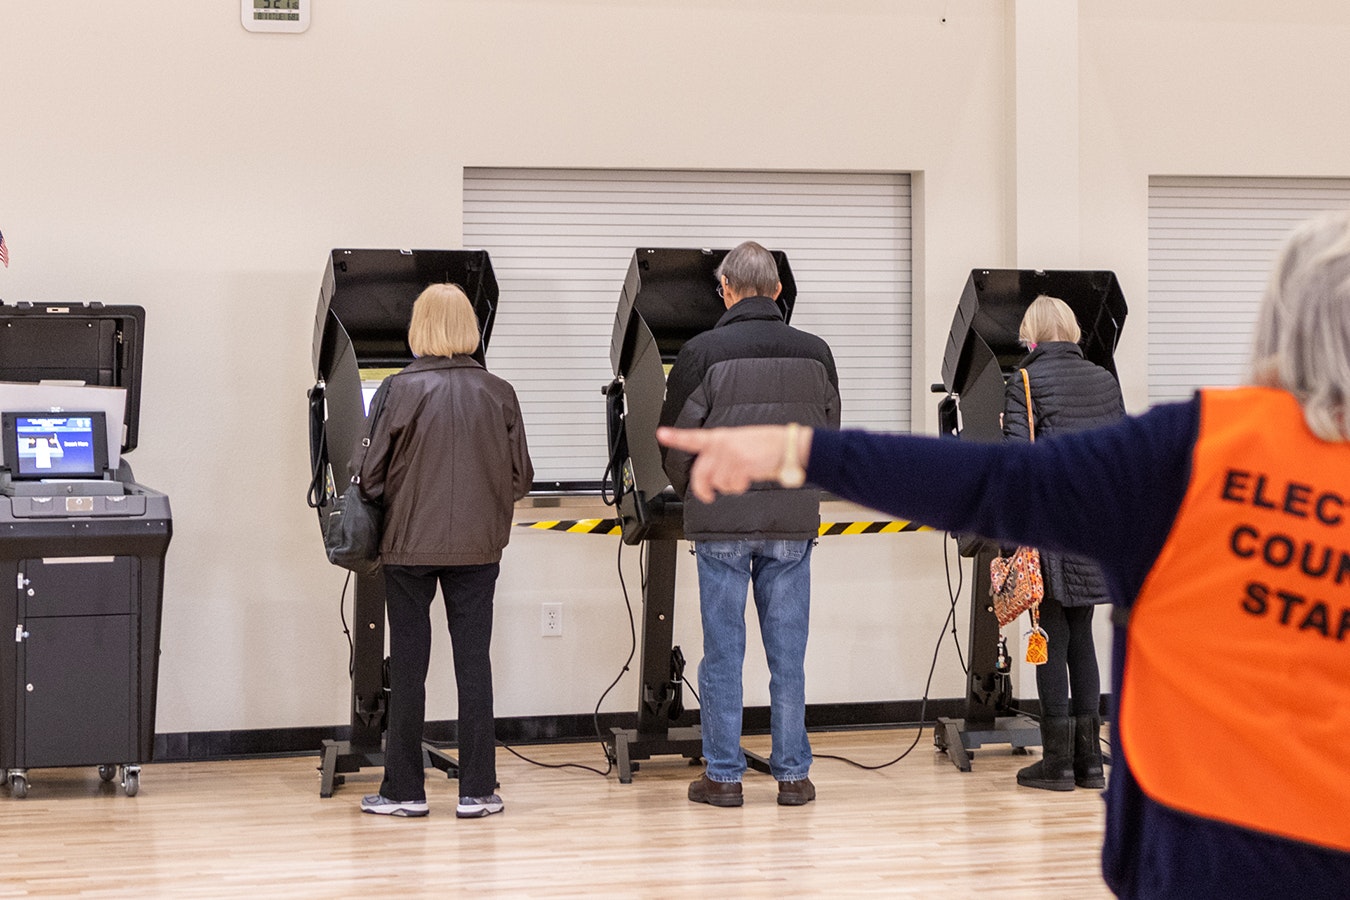 A Laramie County elections staffer directs voters during the 2022 general election in Cheyenne.